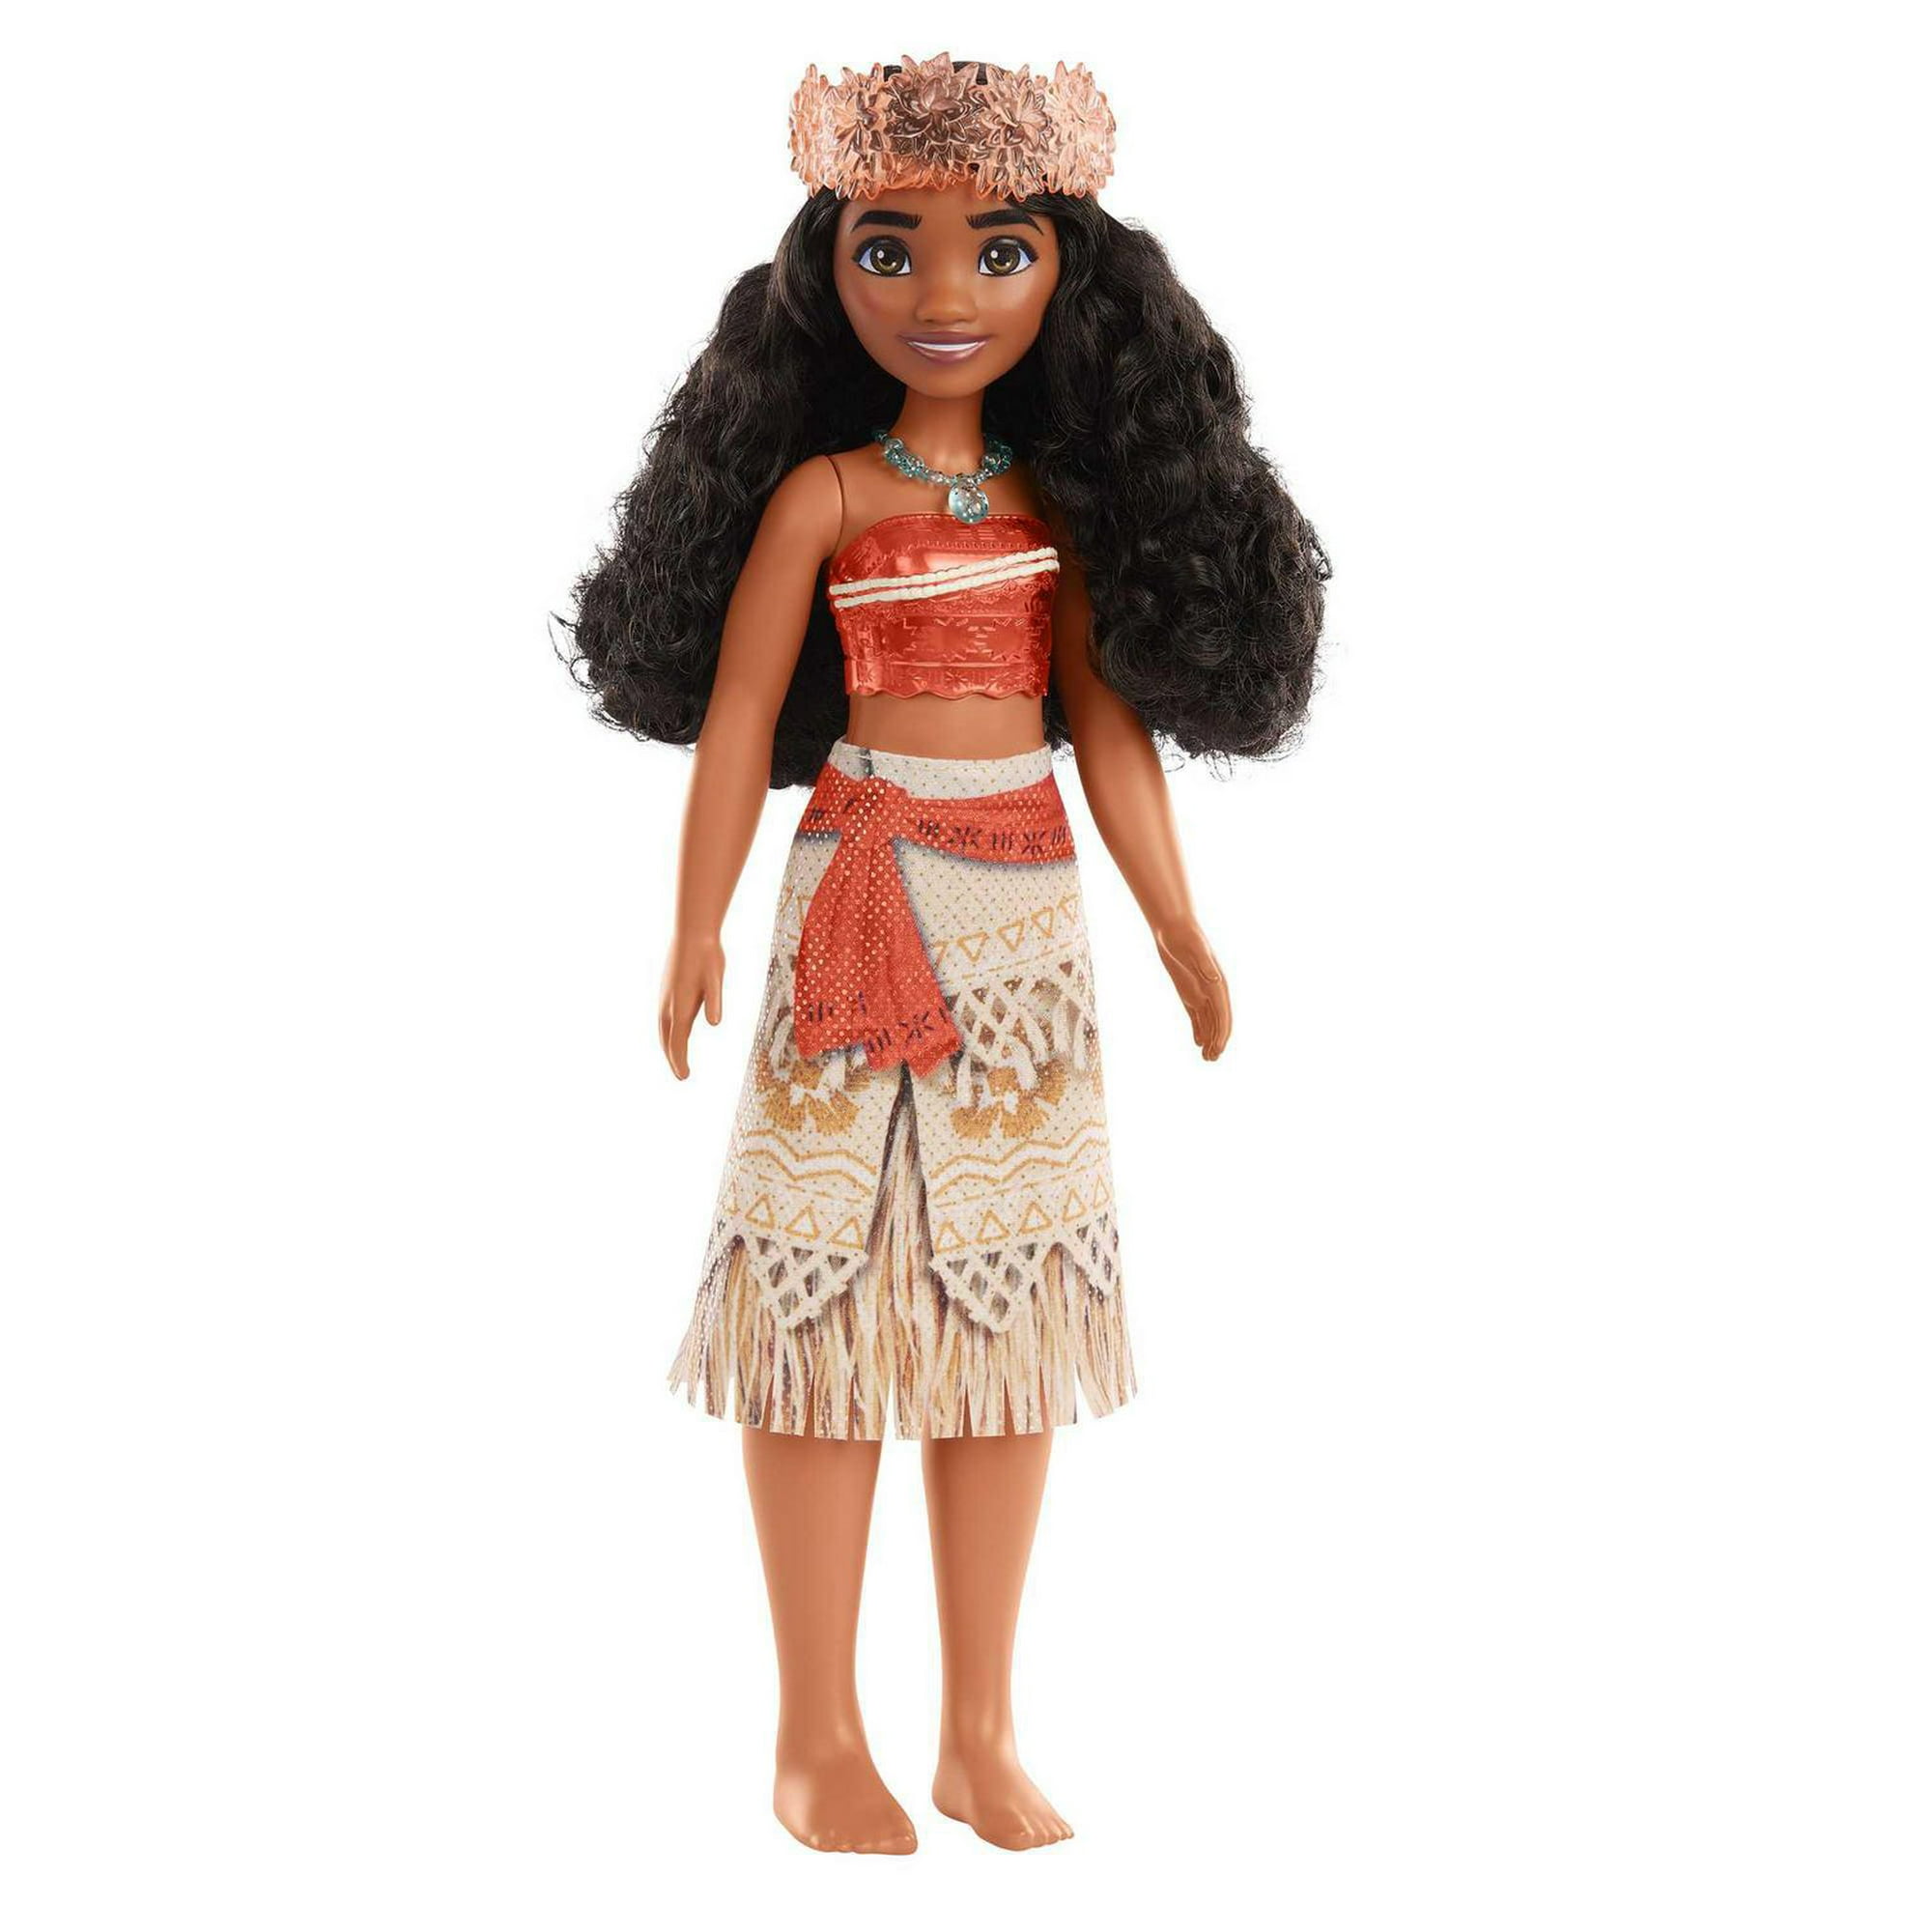 Disney Princess Moana Fashion Doll and Accessory, Toy Inspired by